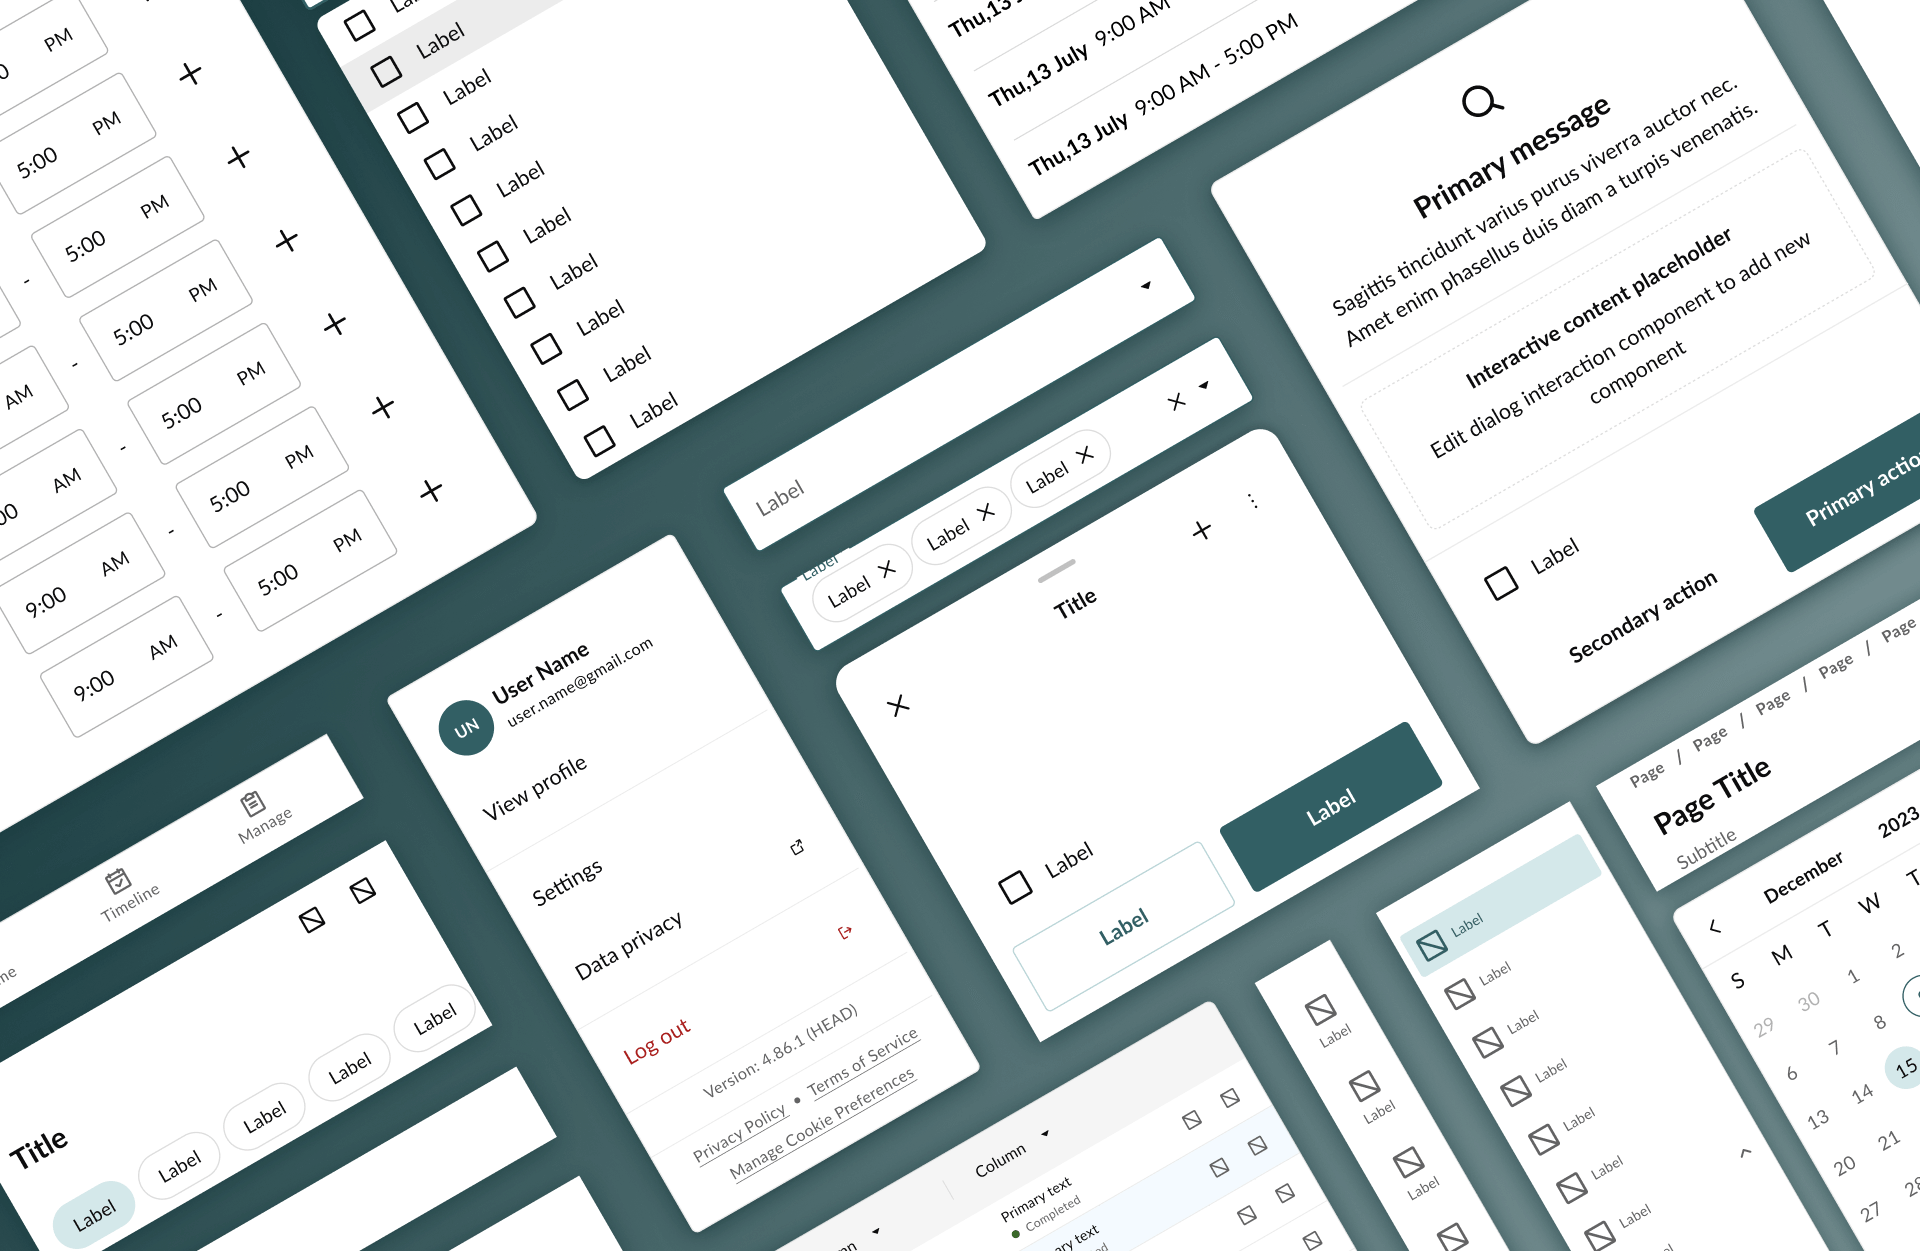 Leveraging a Design System to Improve Design and Engineer Efficiency at Curebase